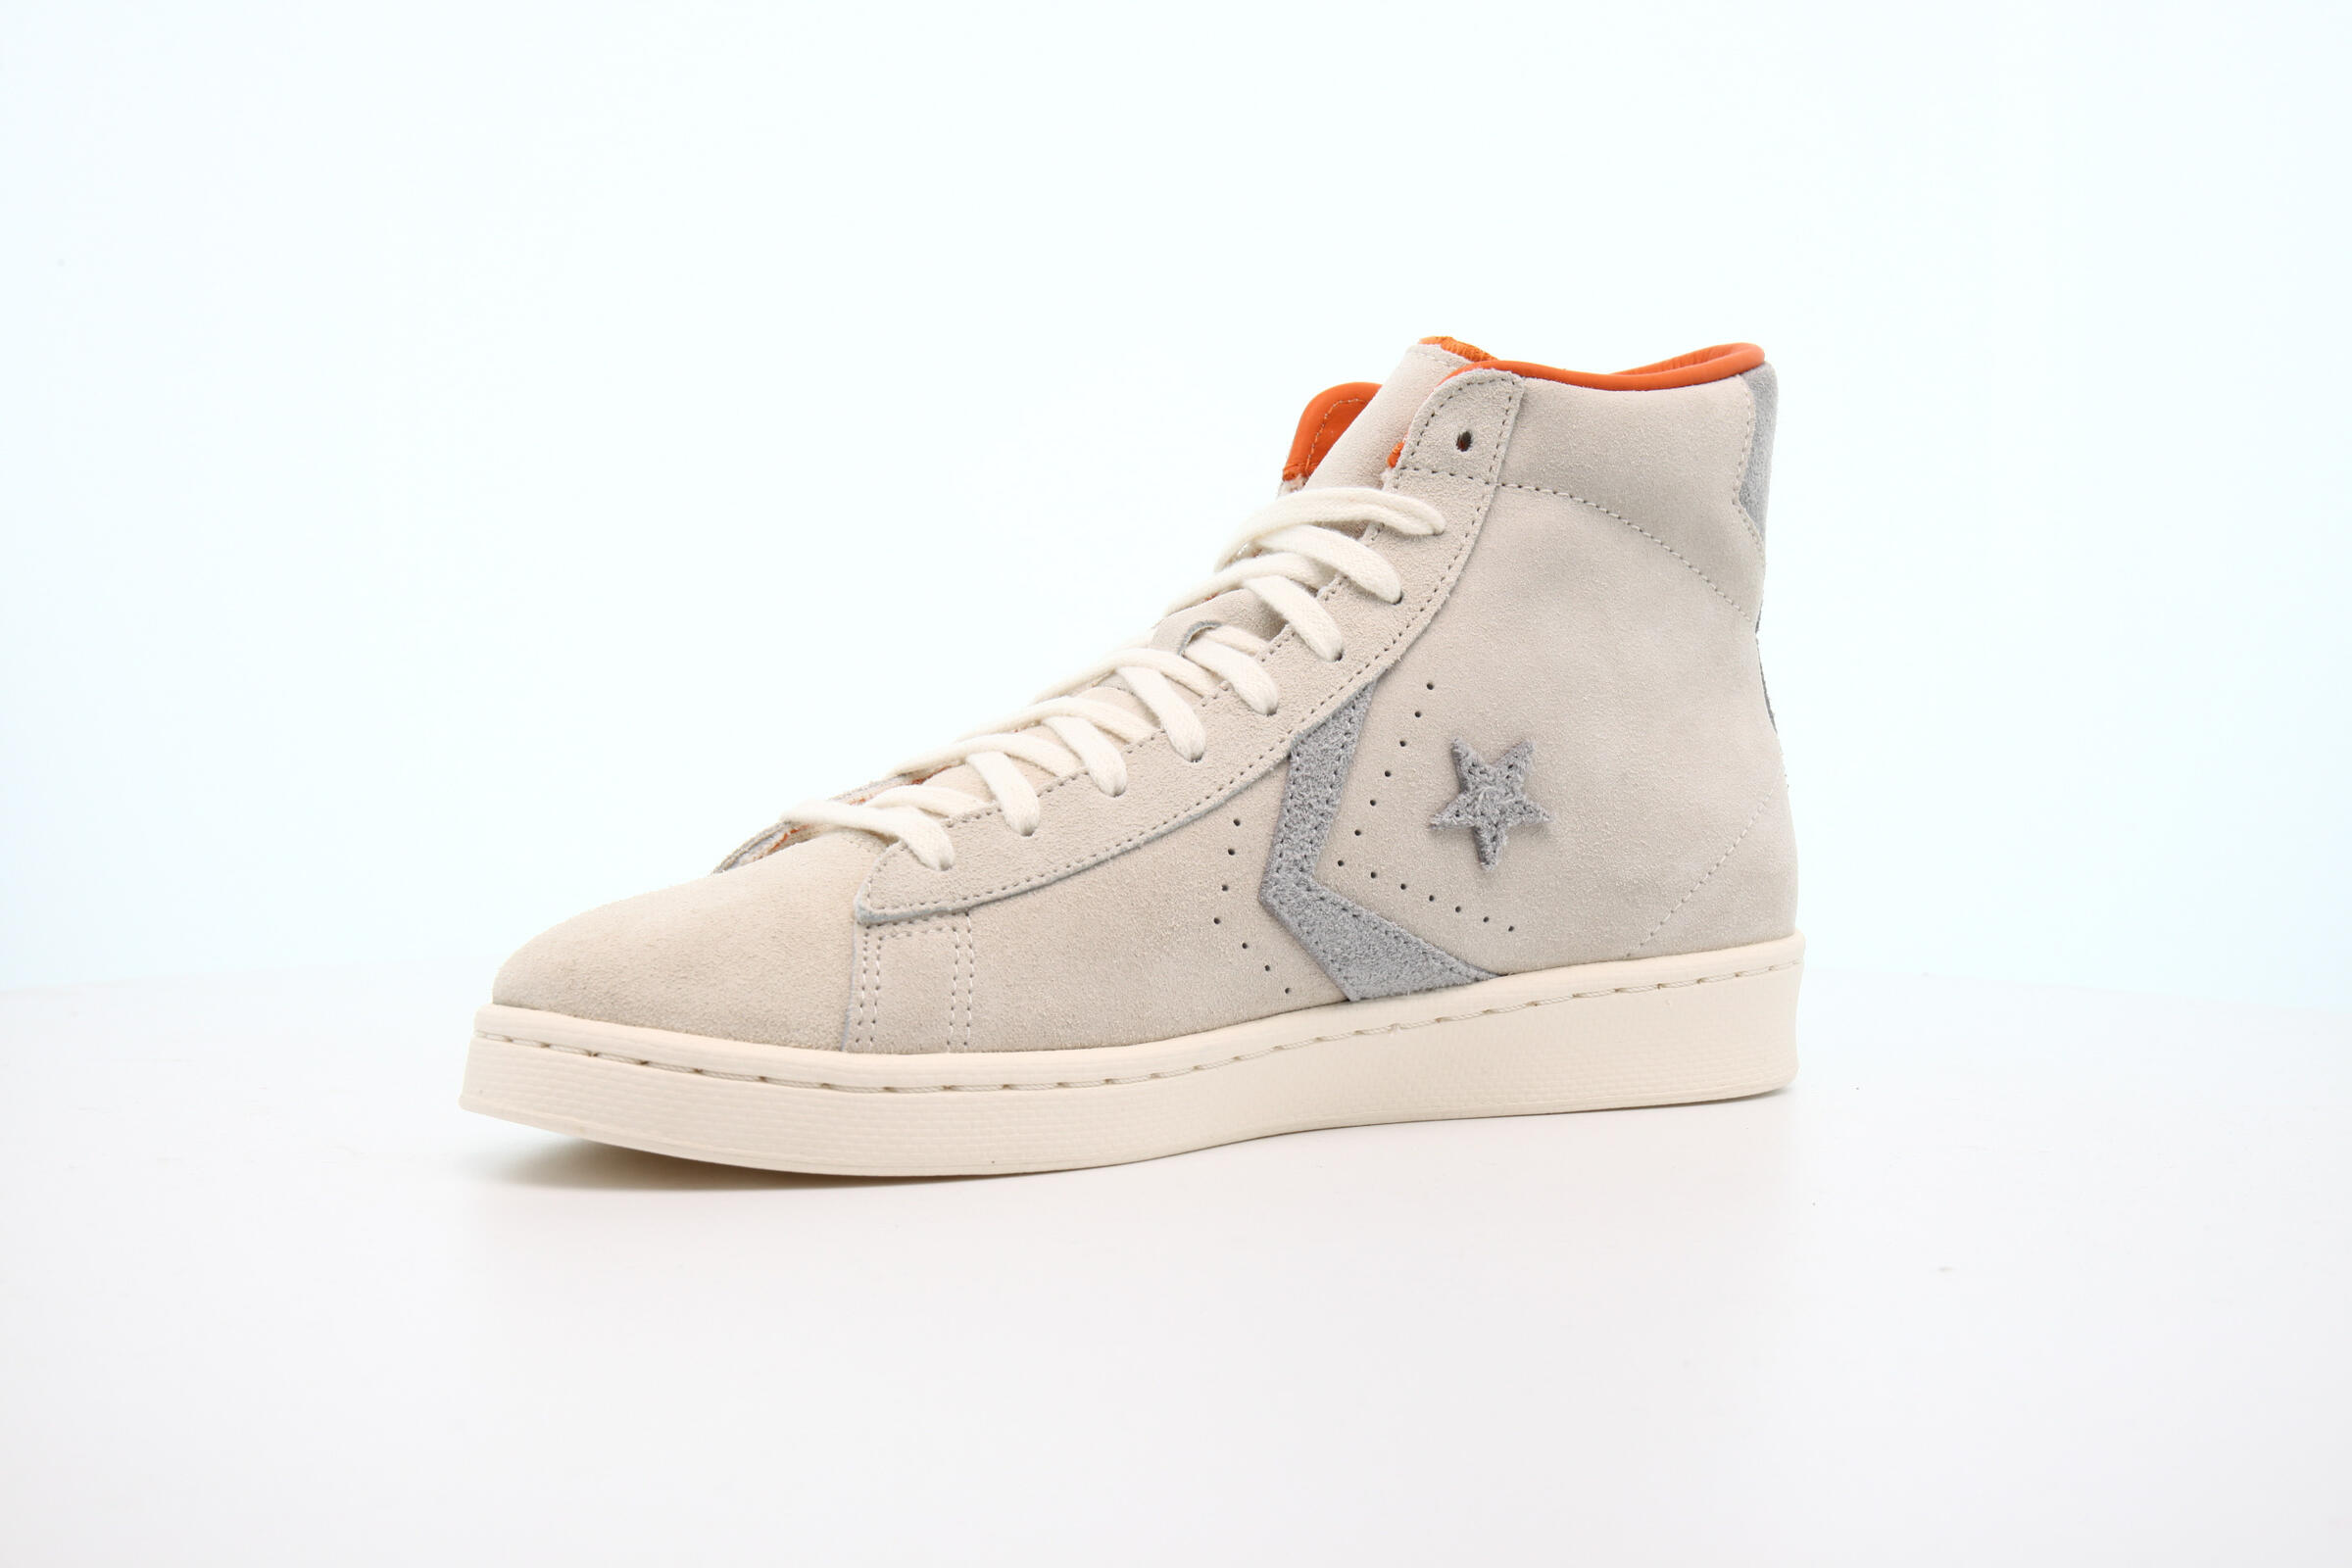 Converse x BUGS BUNNY 80TH PRO LEATHER HI "NATURAL"